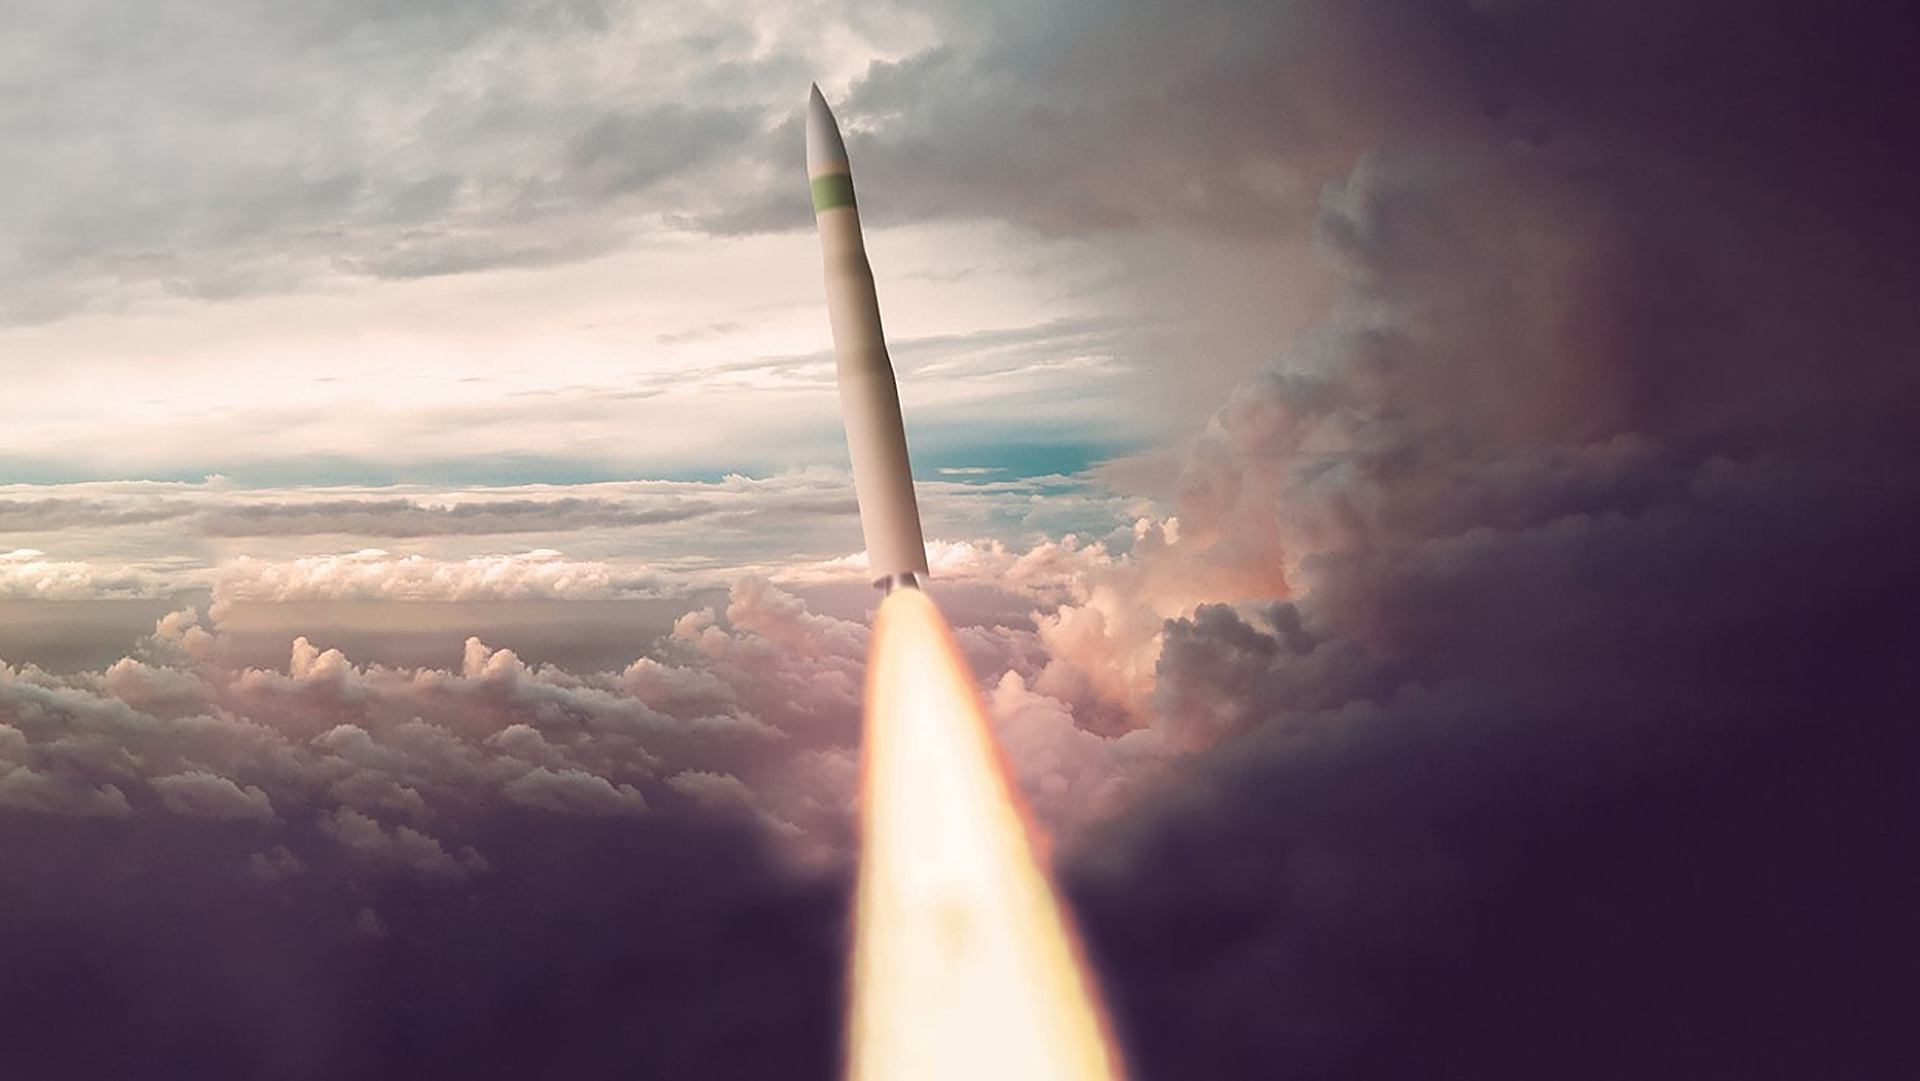 Reentry Vehicle Test For America's New ICBM Failed Just After Launch